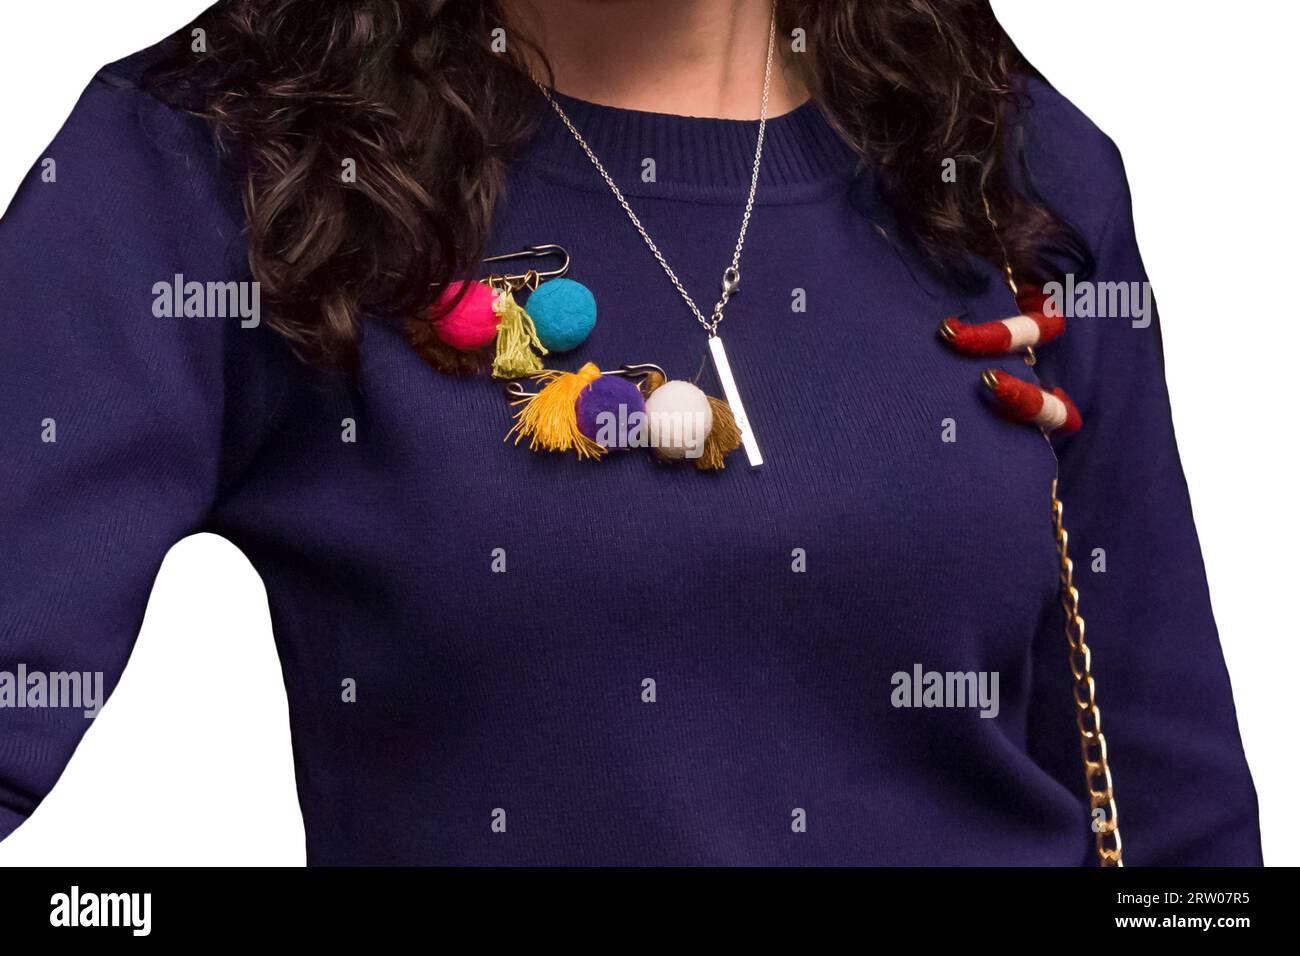 Women's dark purple sweater decorated with colored objects, soft toys on a pin, close-up on a white isolated background. Stock Photo